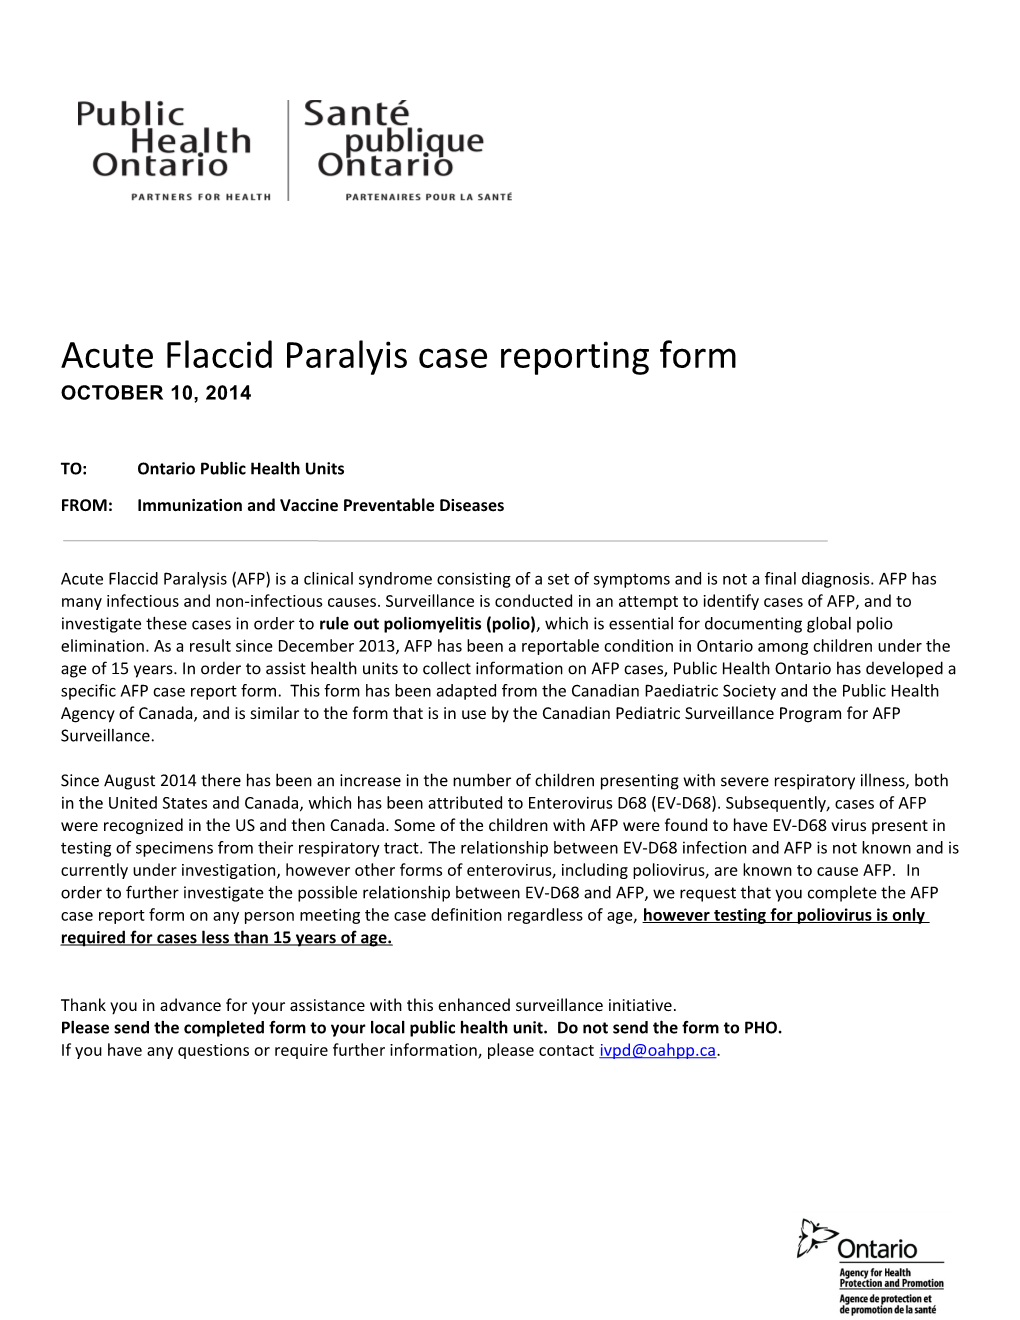 Acute Flaccid Paralyis Case Reporting Form